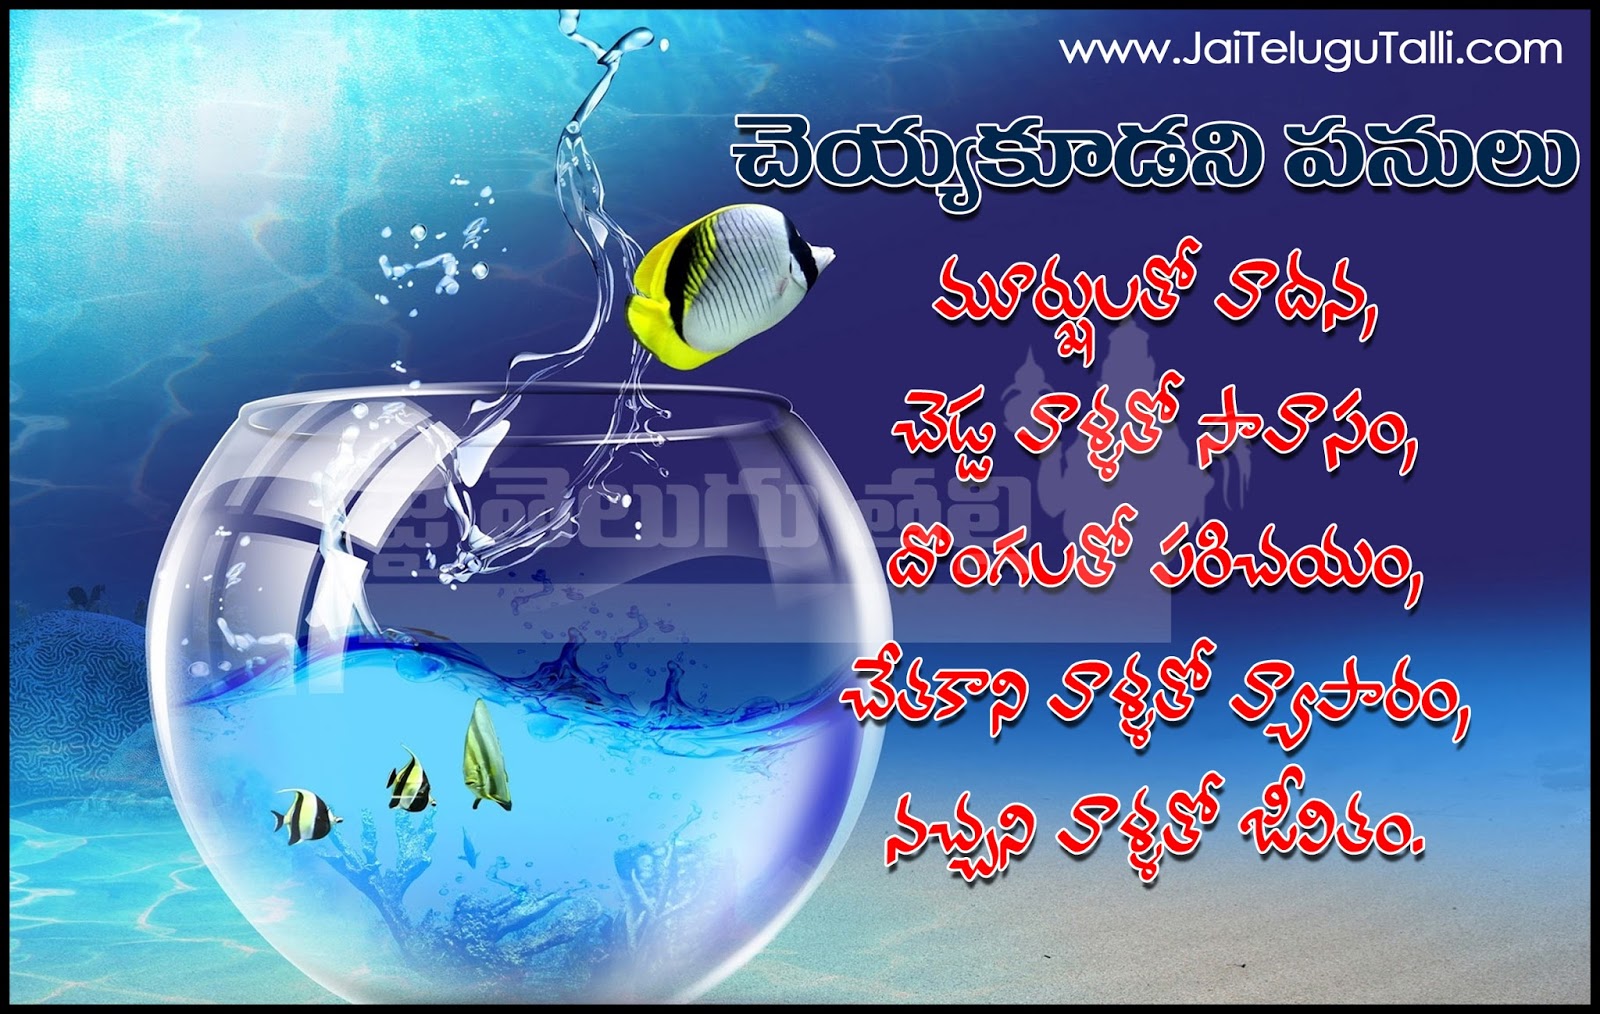 Today Telugu Inspirational Thoughts And Messages Beautiful Telugu And Daily Good Morning Good AfterNoon Quotes In Teugu Cool Telugu New